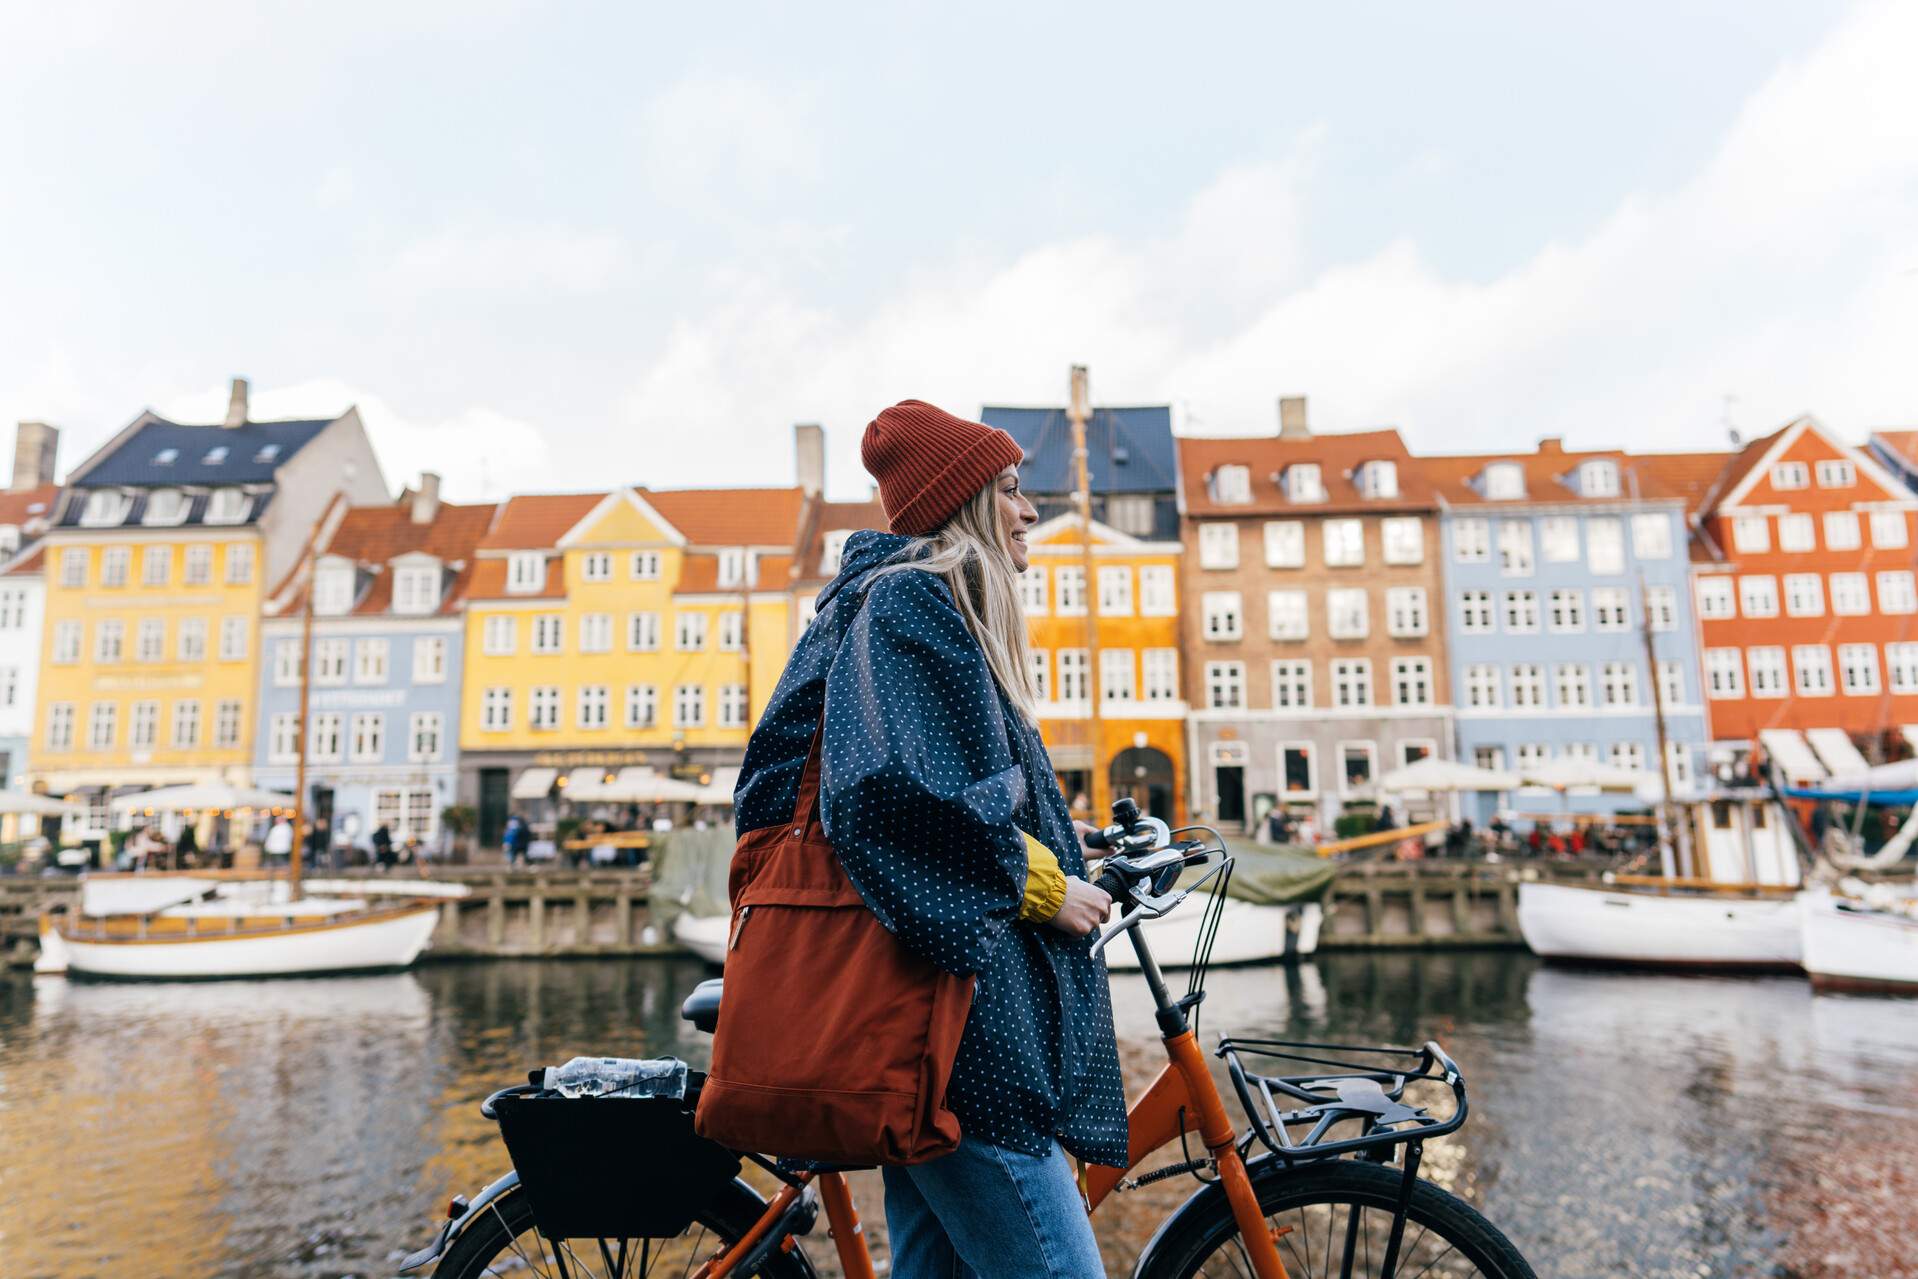 A woman in casual clothes stands beside a bicycle with a backdrop of a river canal along a row of colourful buildings.